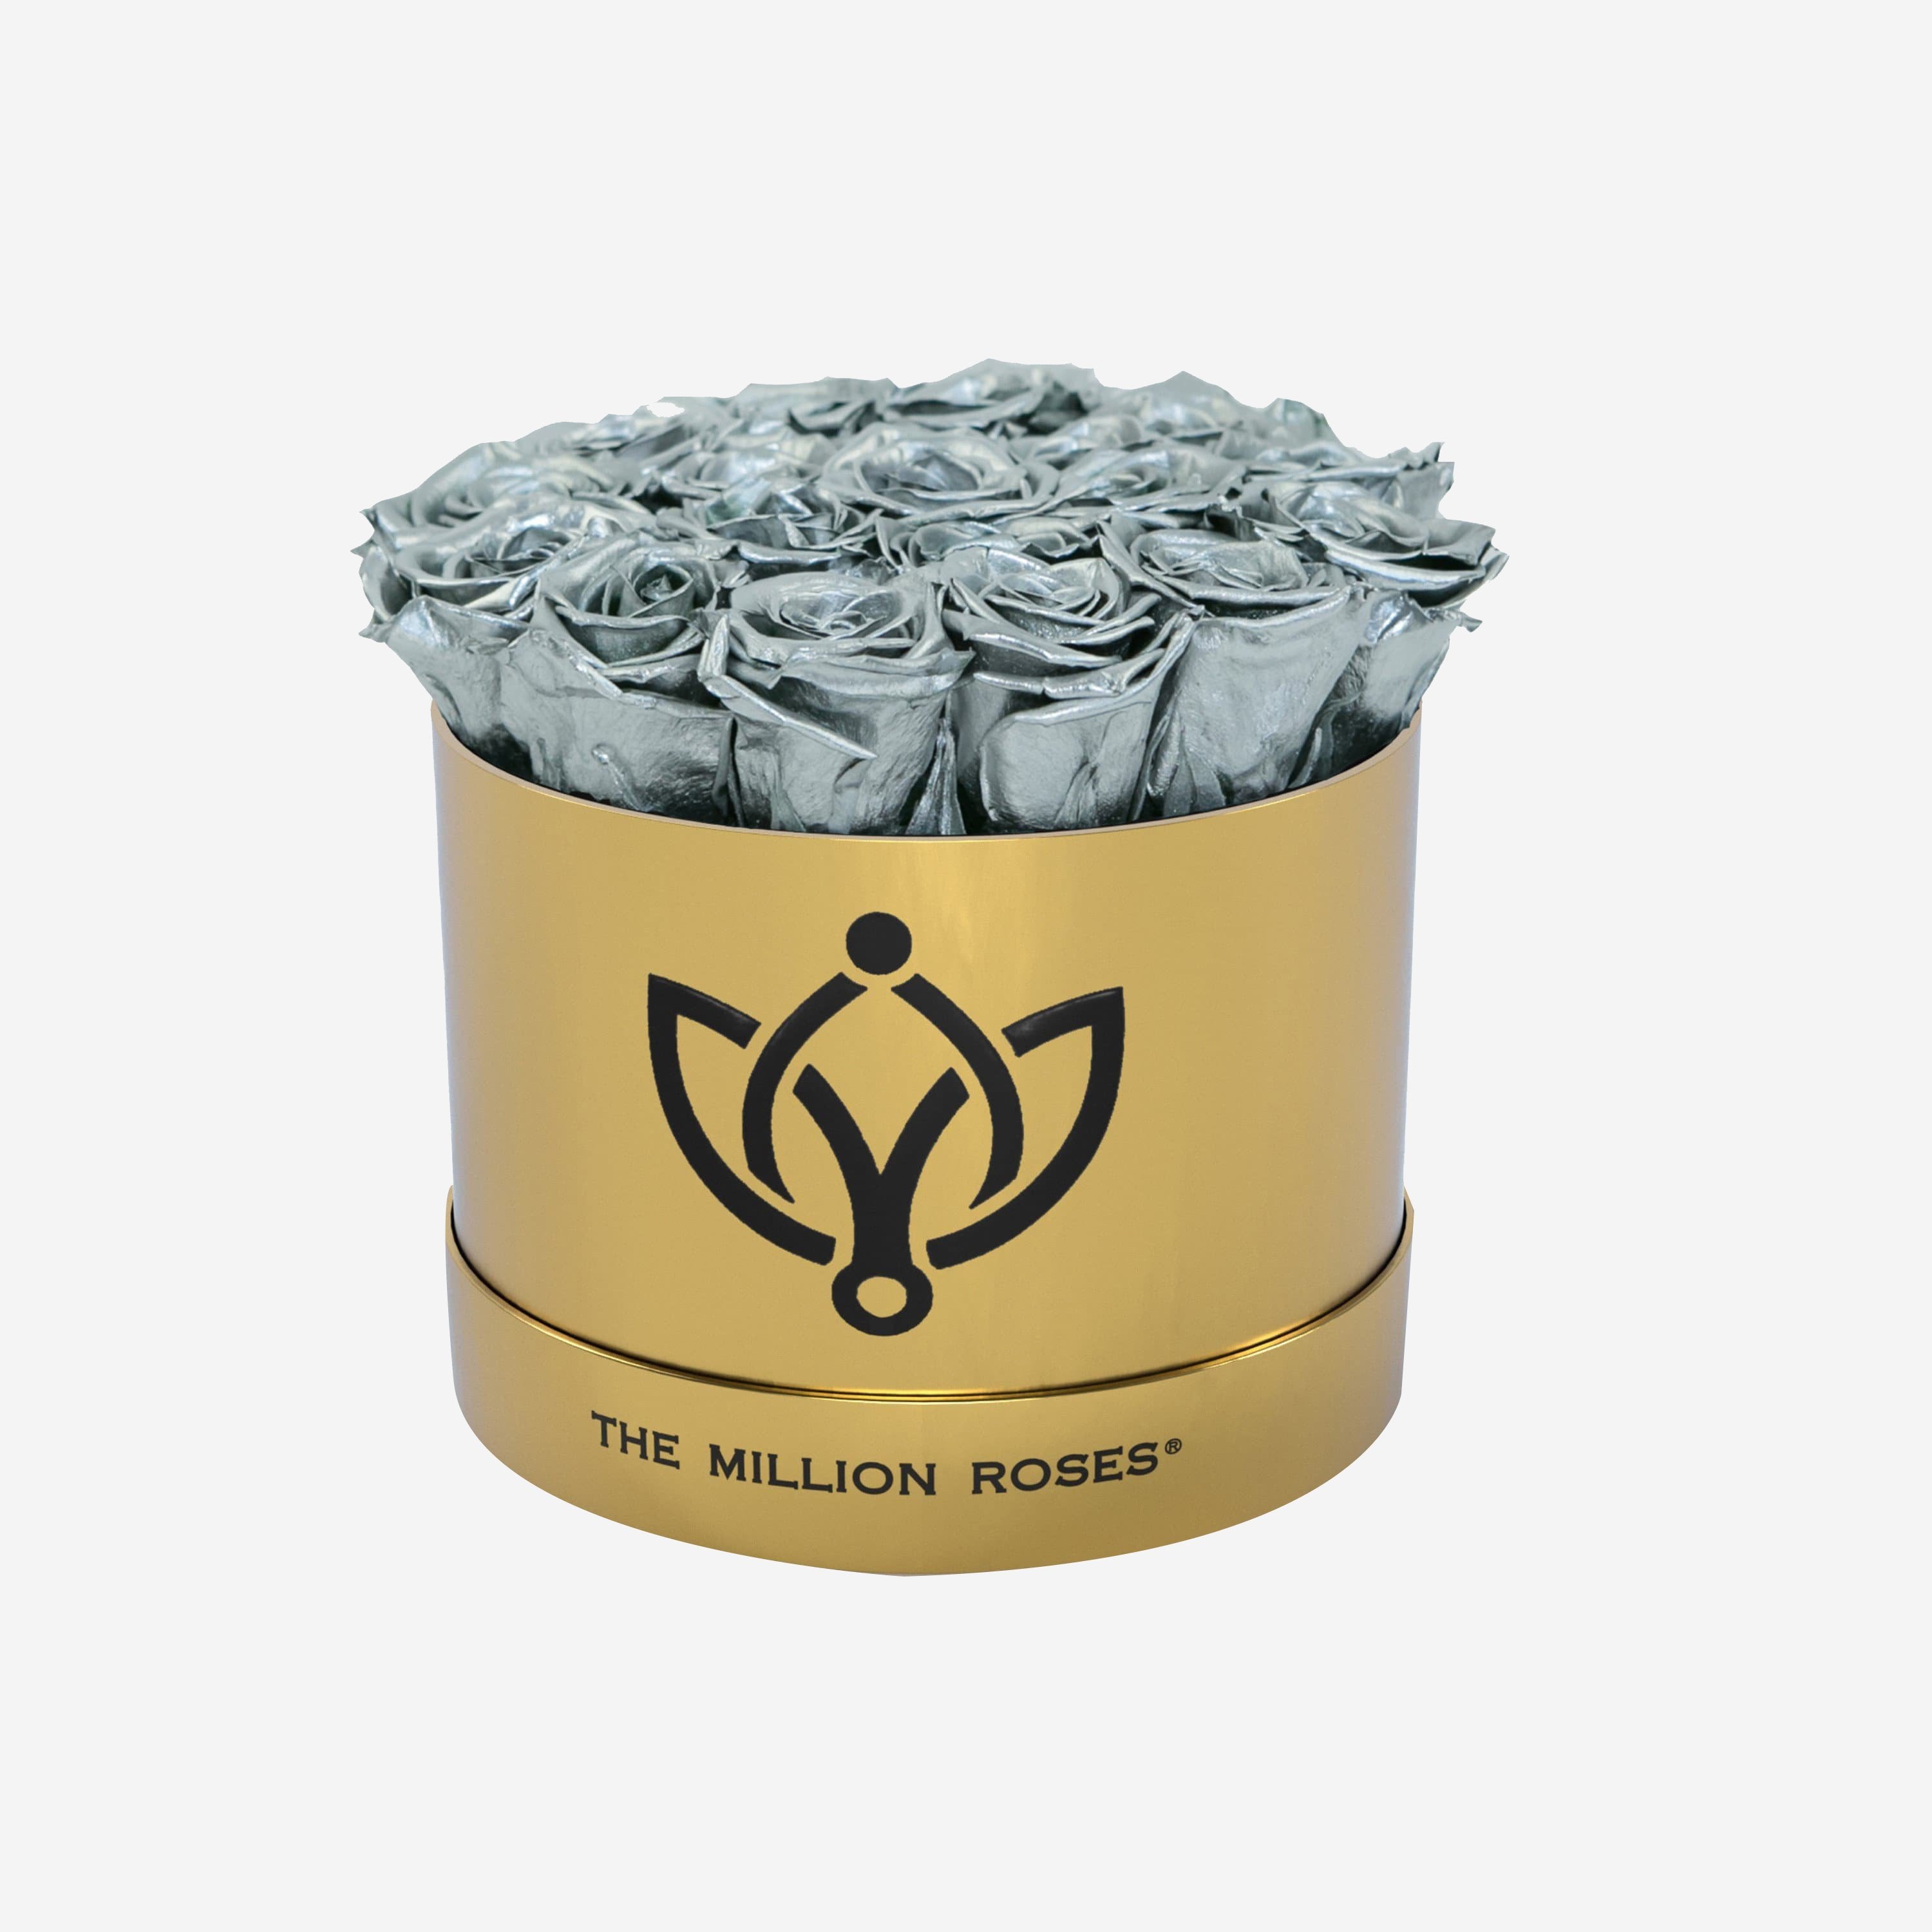 Classic Mirror Gold Box | Silver Roses - The Million Roses